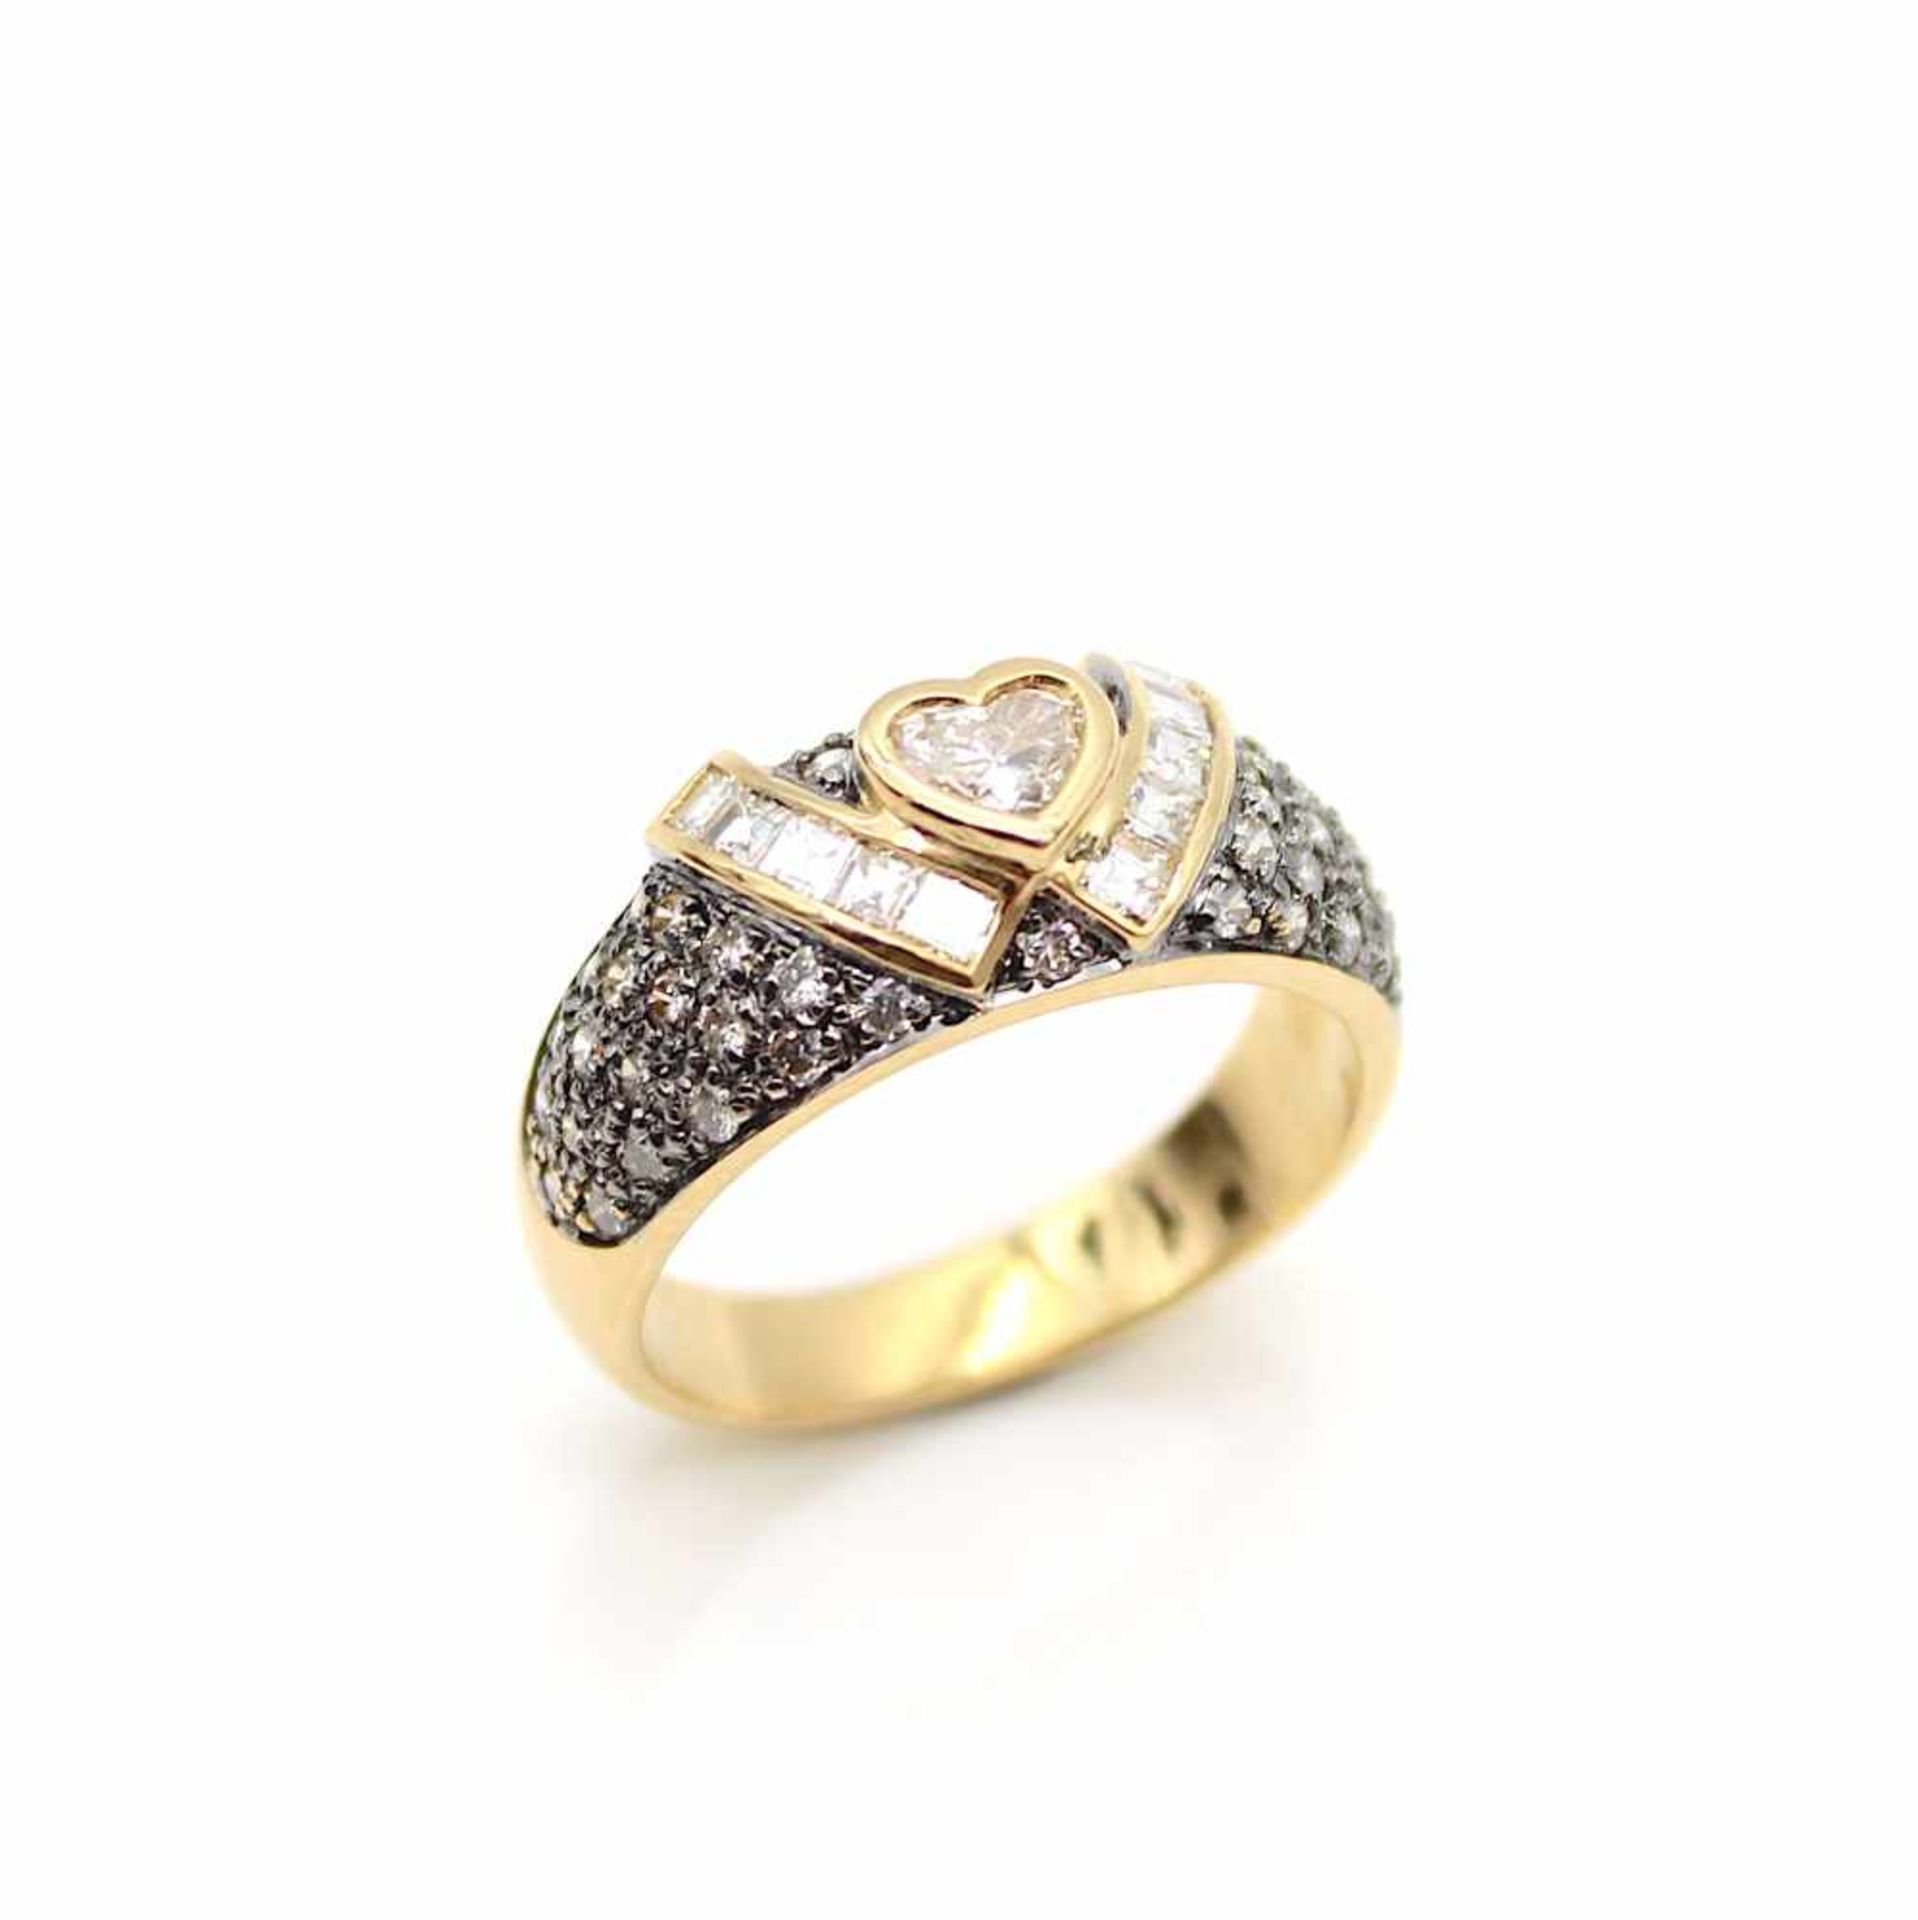 Ring made of 585 gold and black rhodium with a diamond heart of approx. 0.45 ct with a high